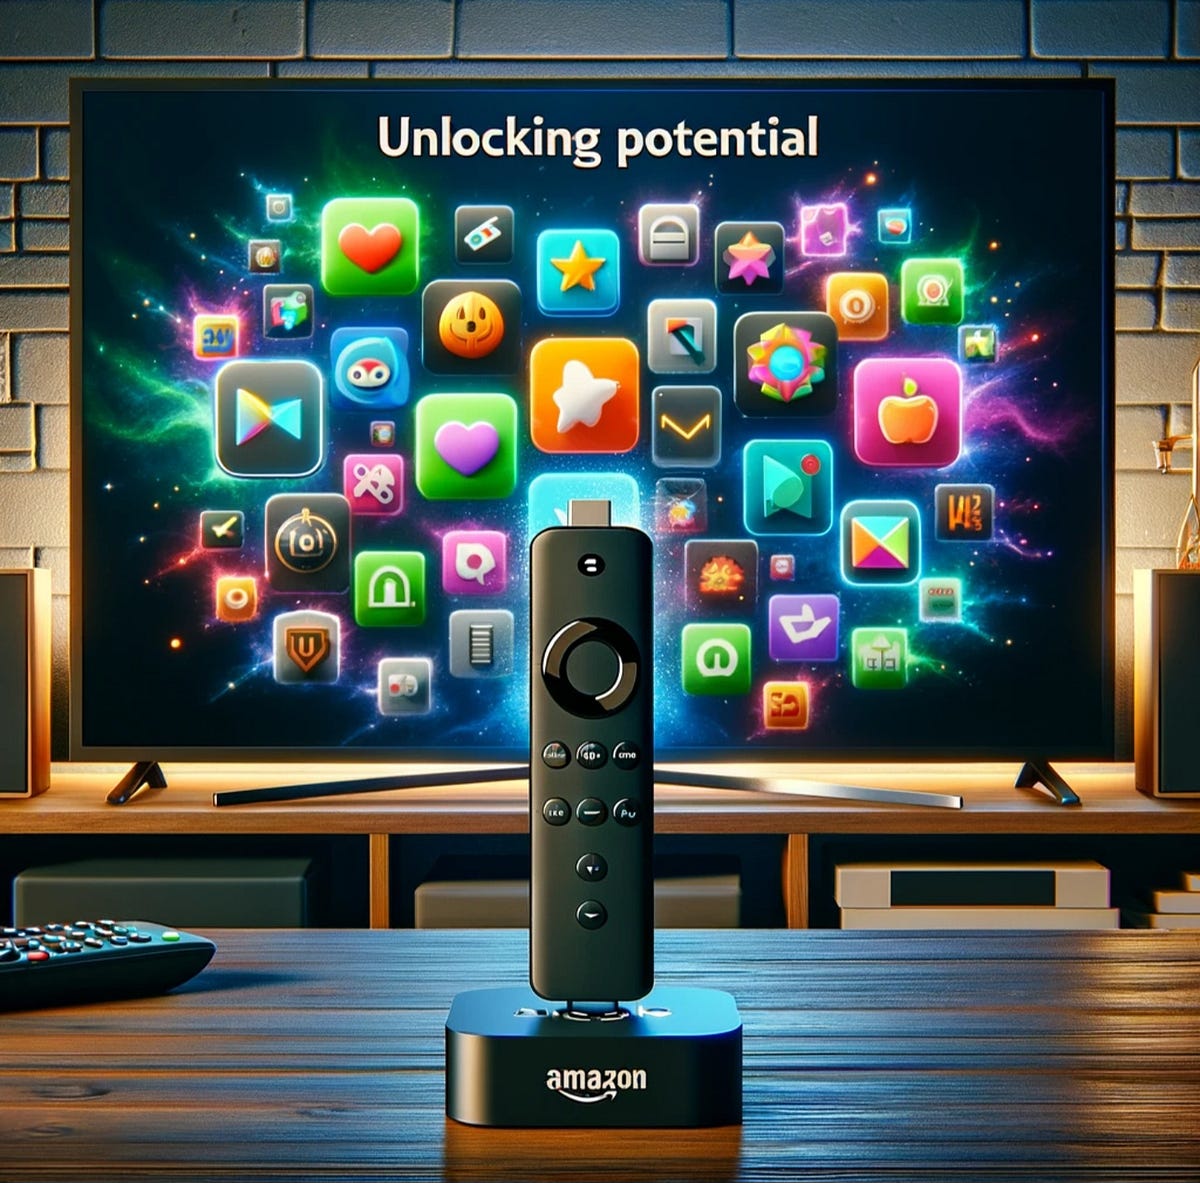 Unlocking Your Amazon Firestick’s Full Potential The Benefits of Using